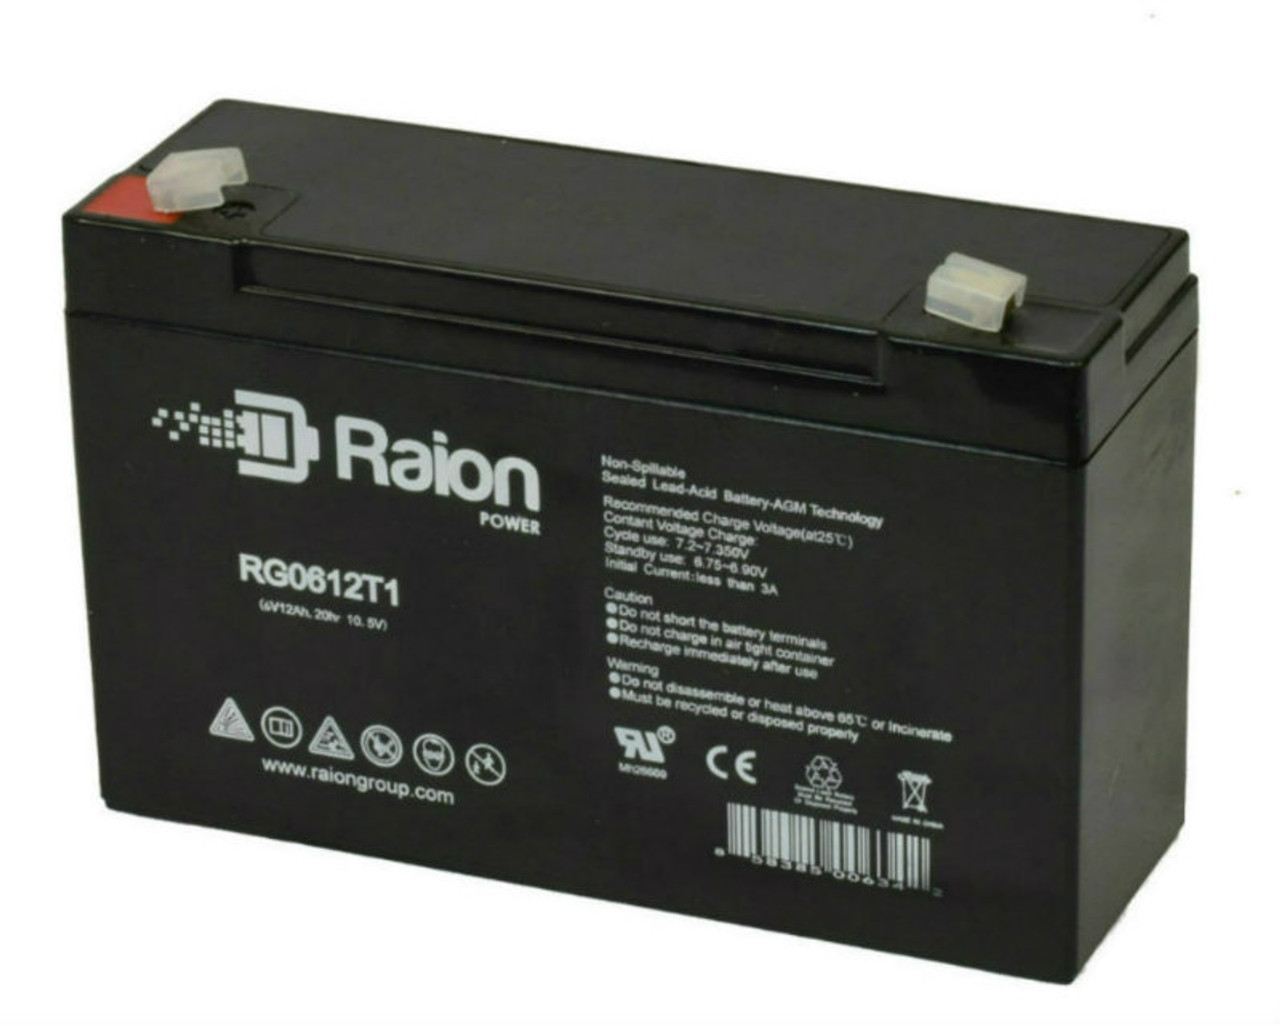 Raion Power RG06120T1 Replacement Emergency Light Battery for Sure-Lites / Cooper Lighting SL-26-50